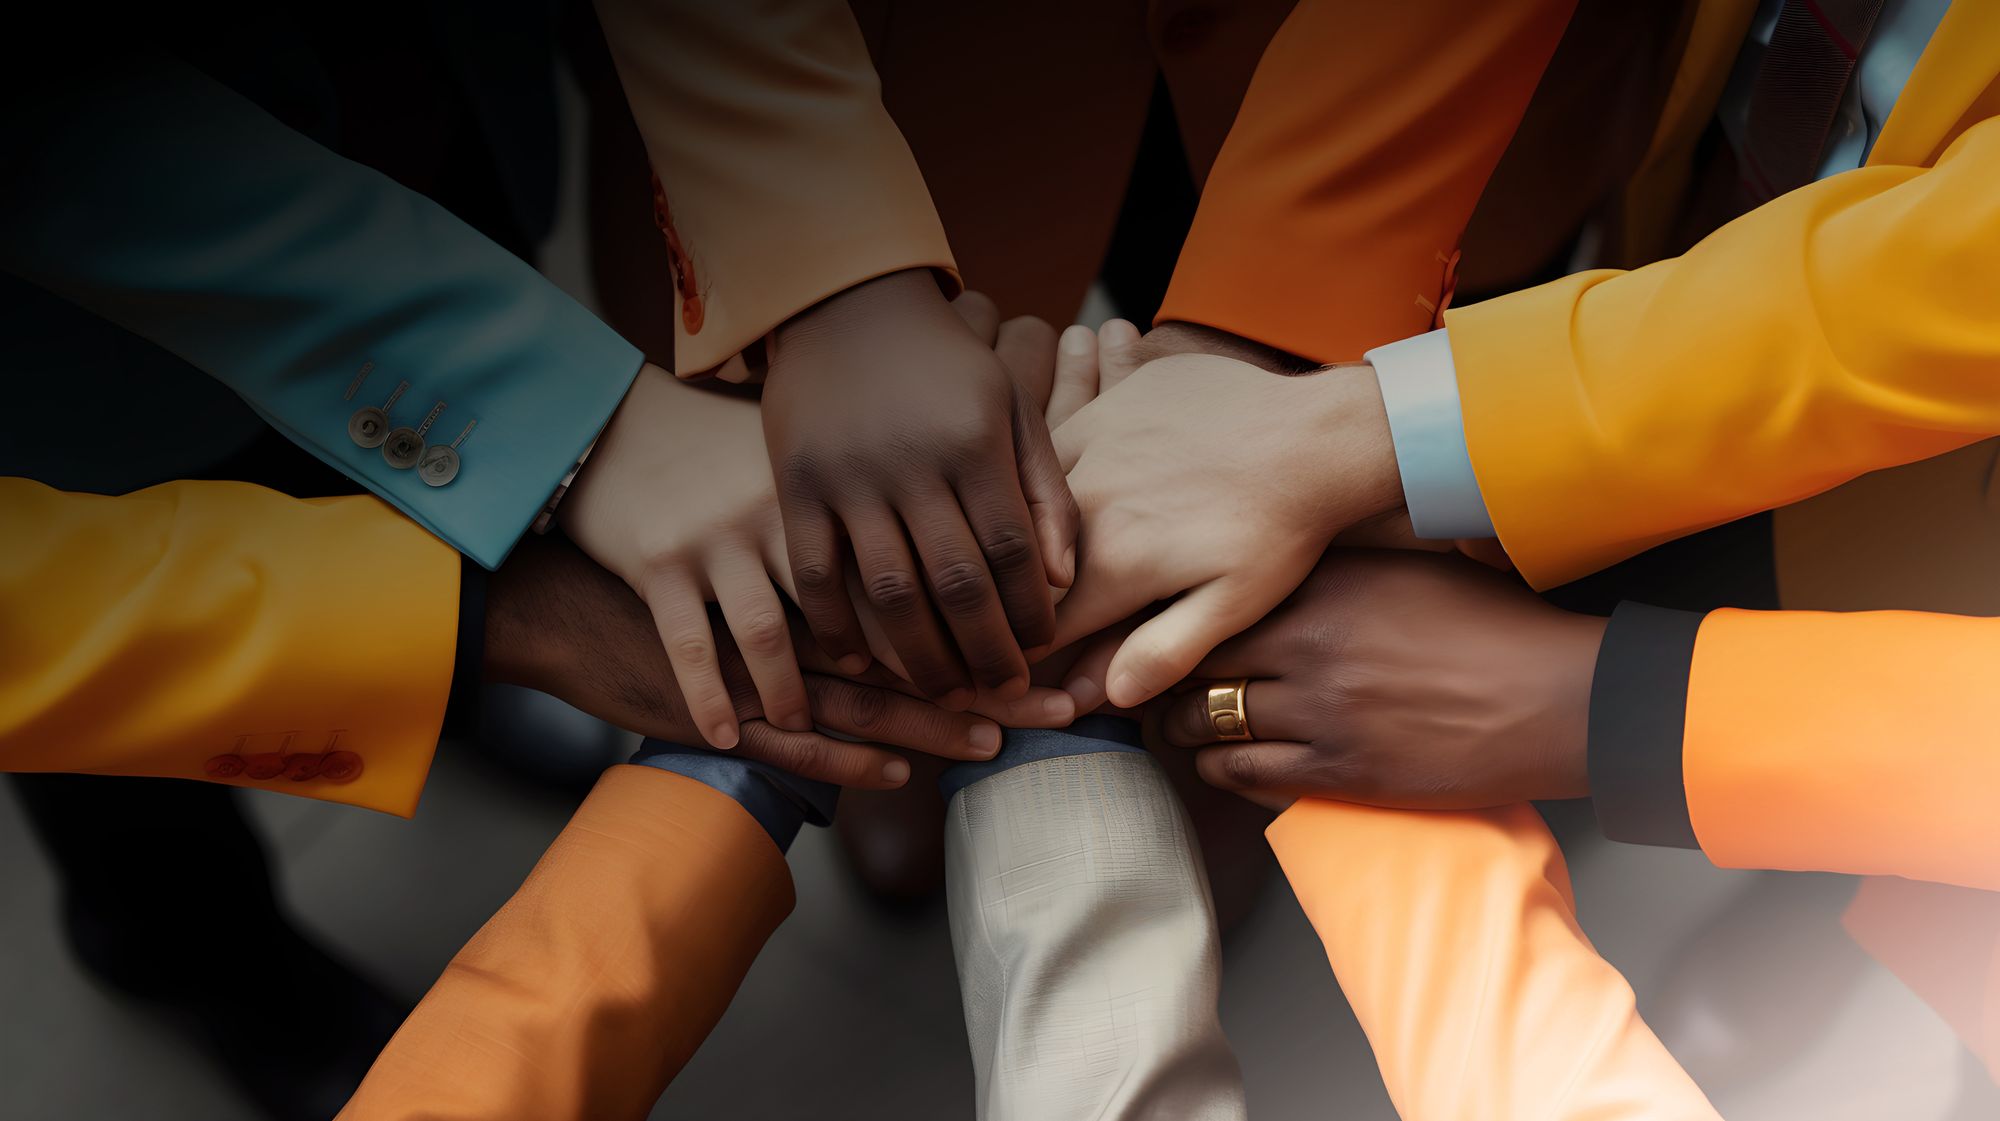 A group of people putting their hands on top one another.